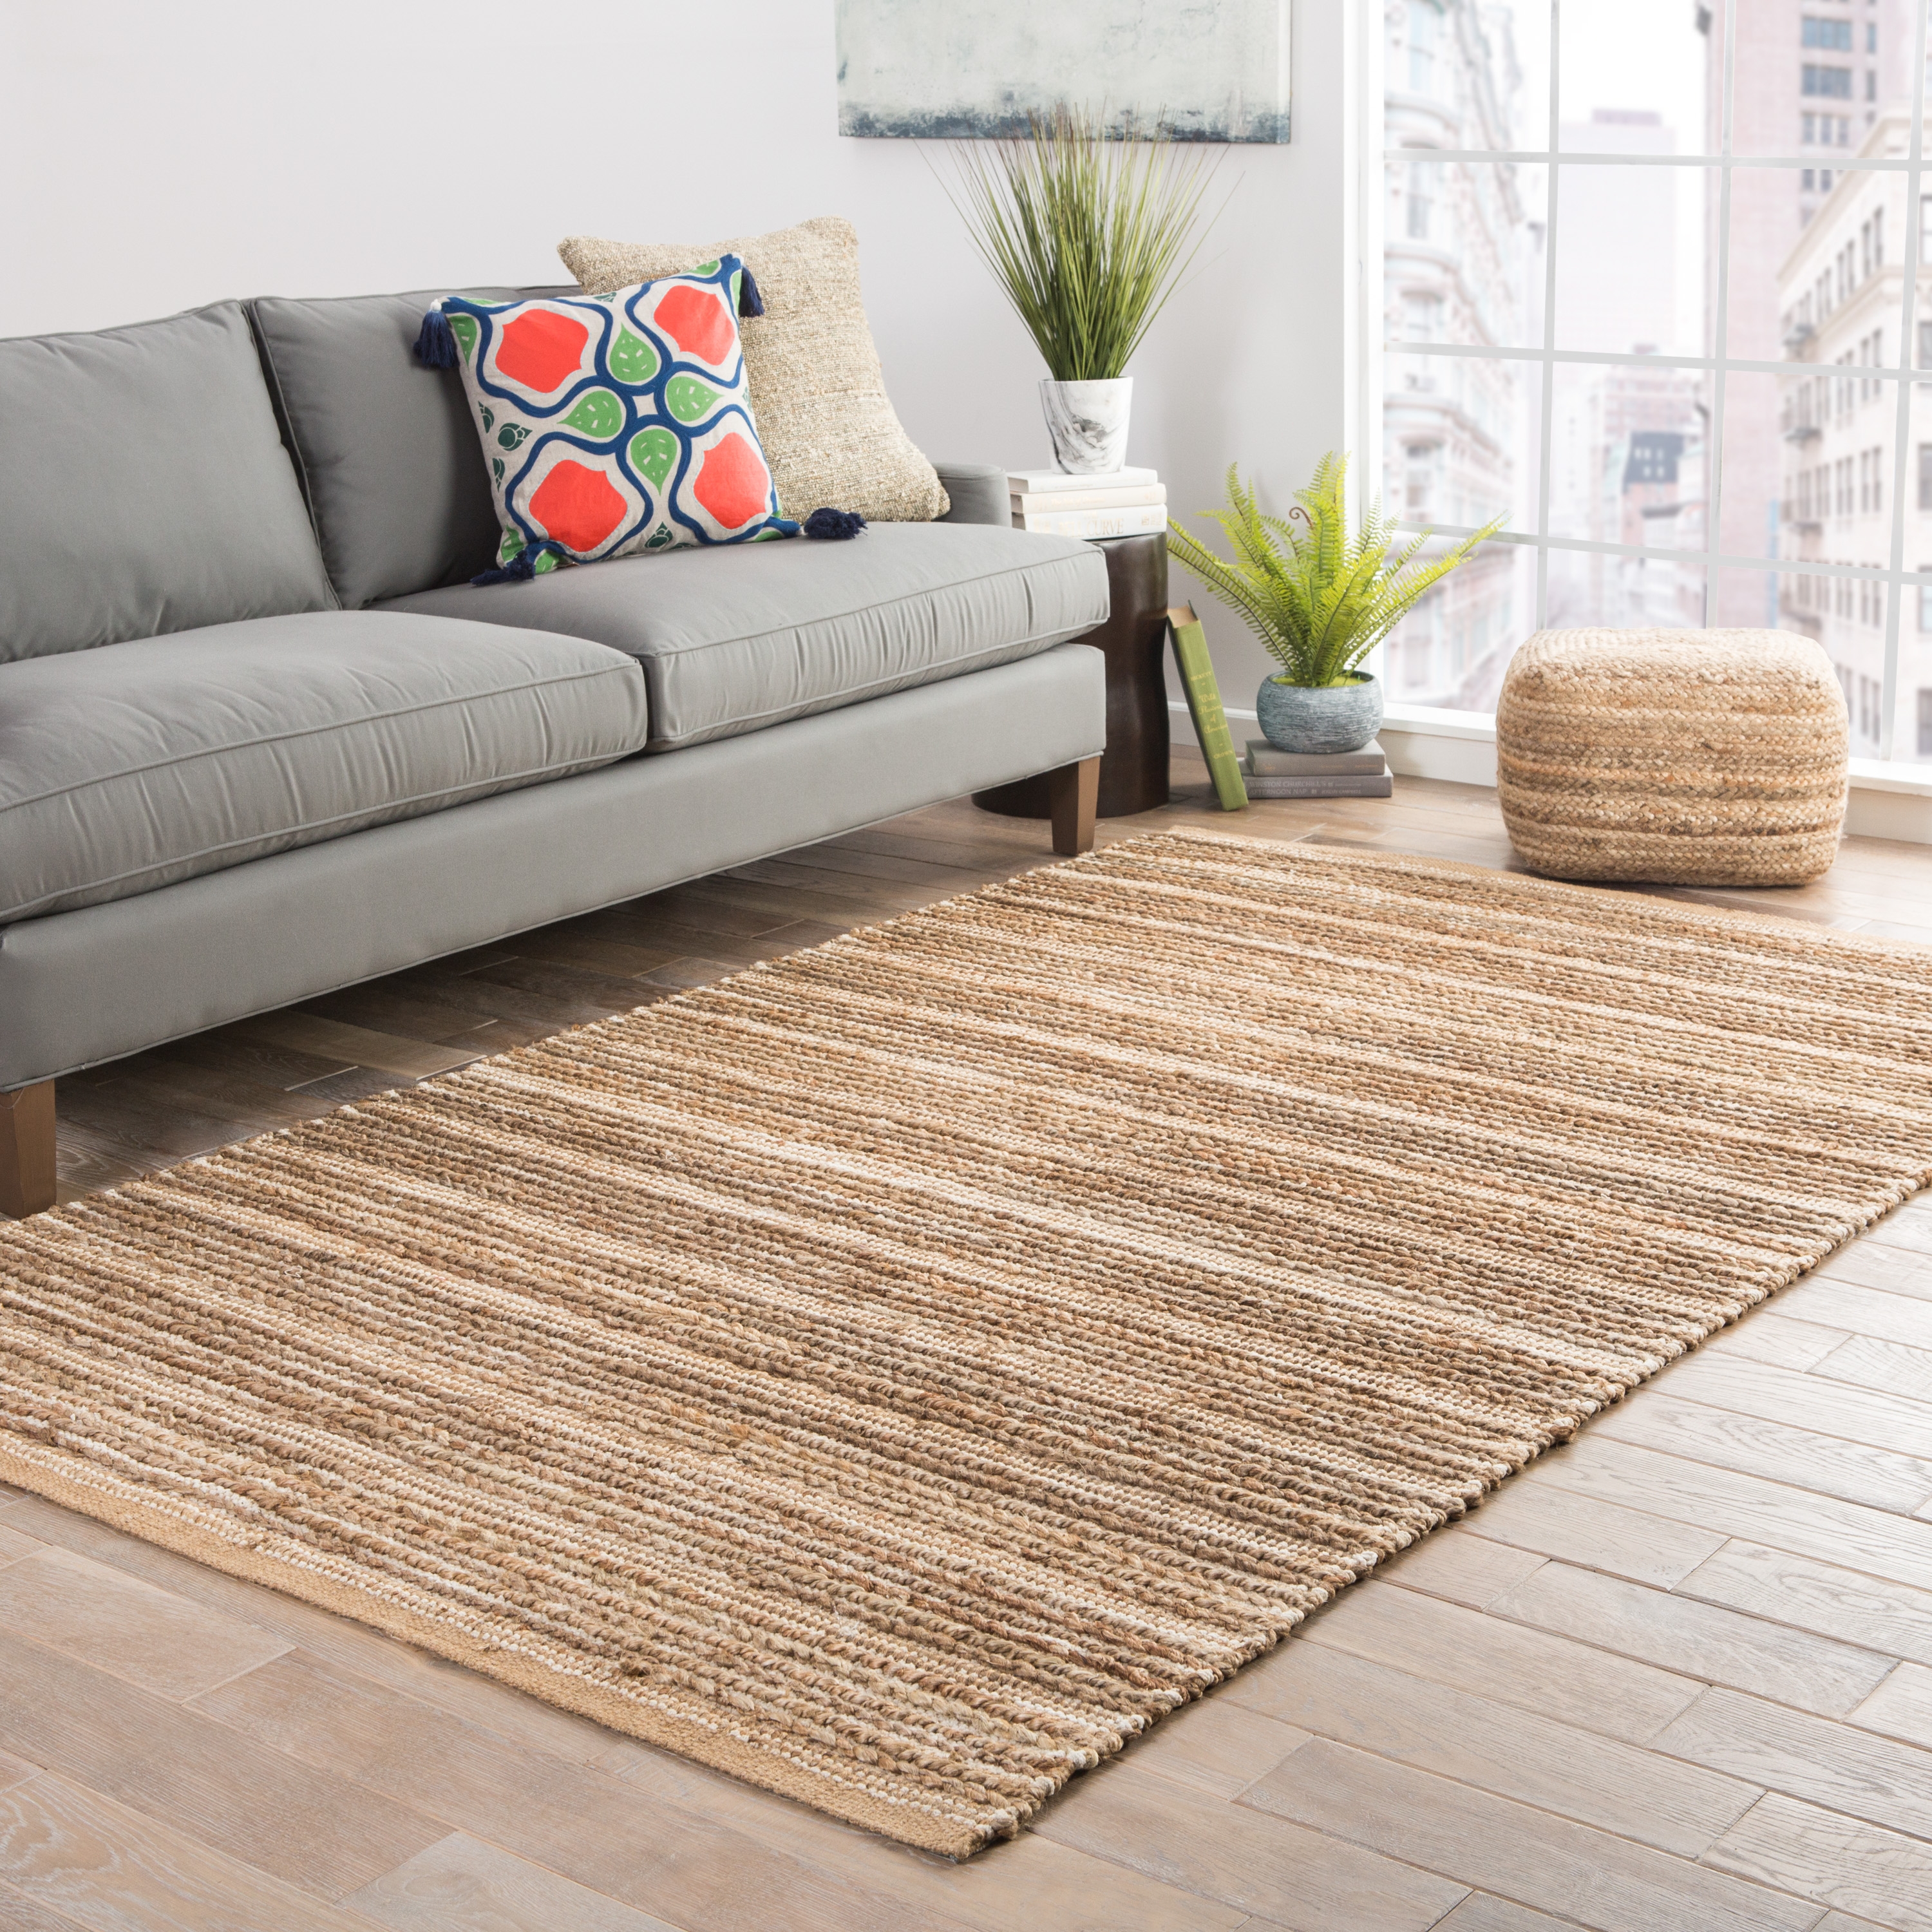 Clifton Natural Solid Tan/ White Runner Rug (2'6" X 9') - Image 4